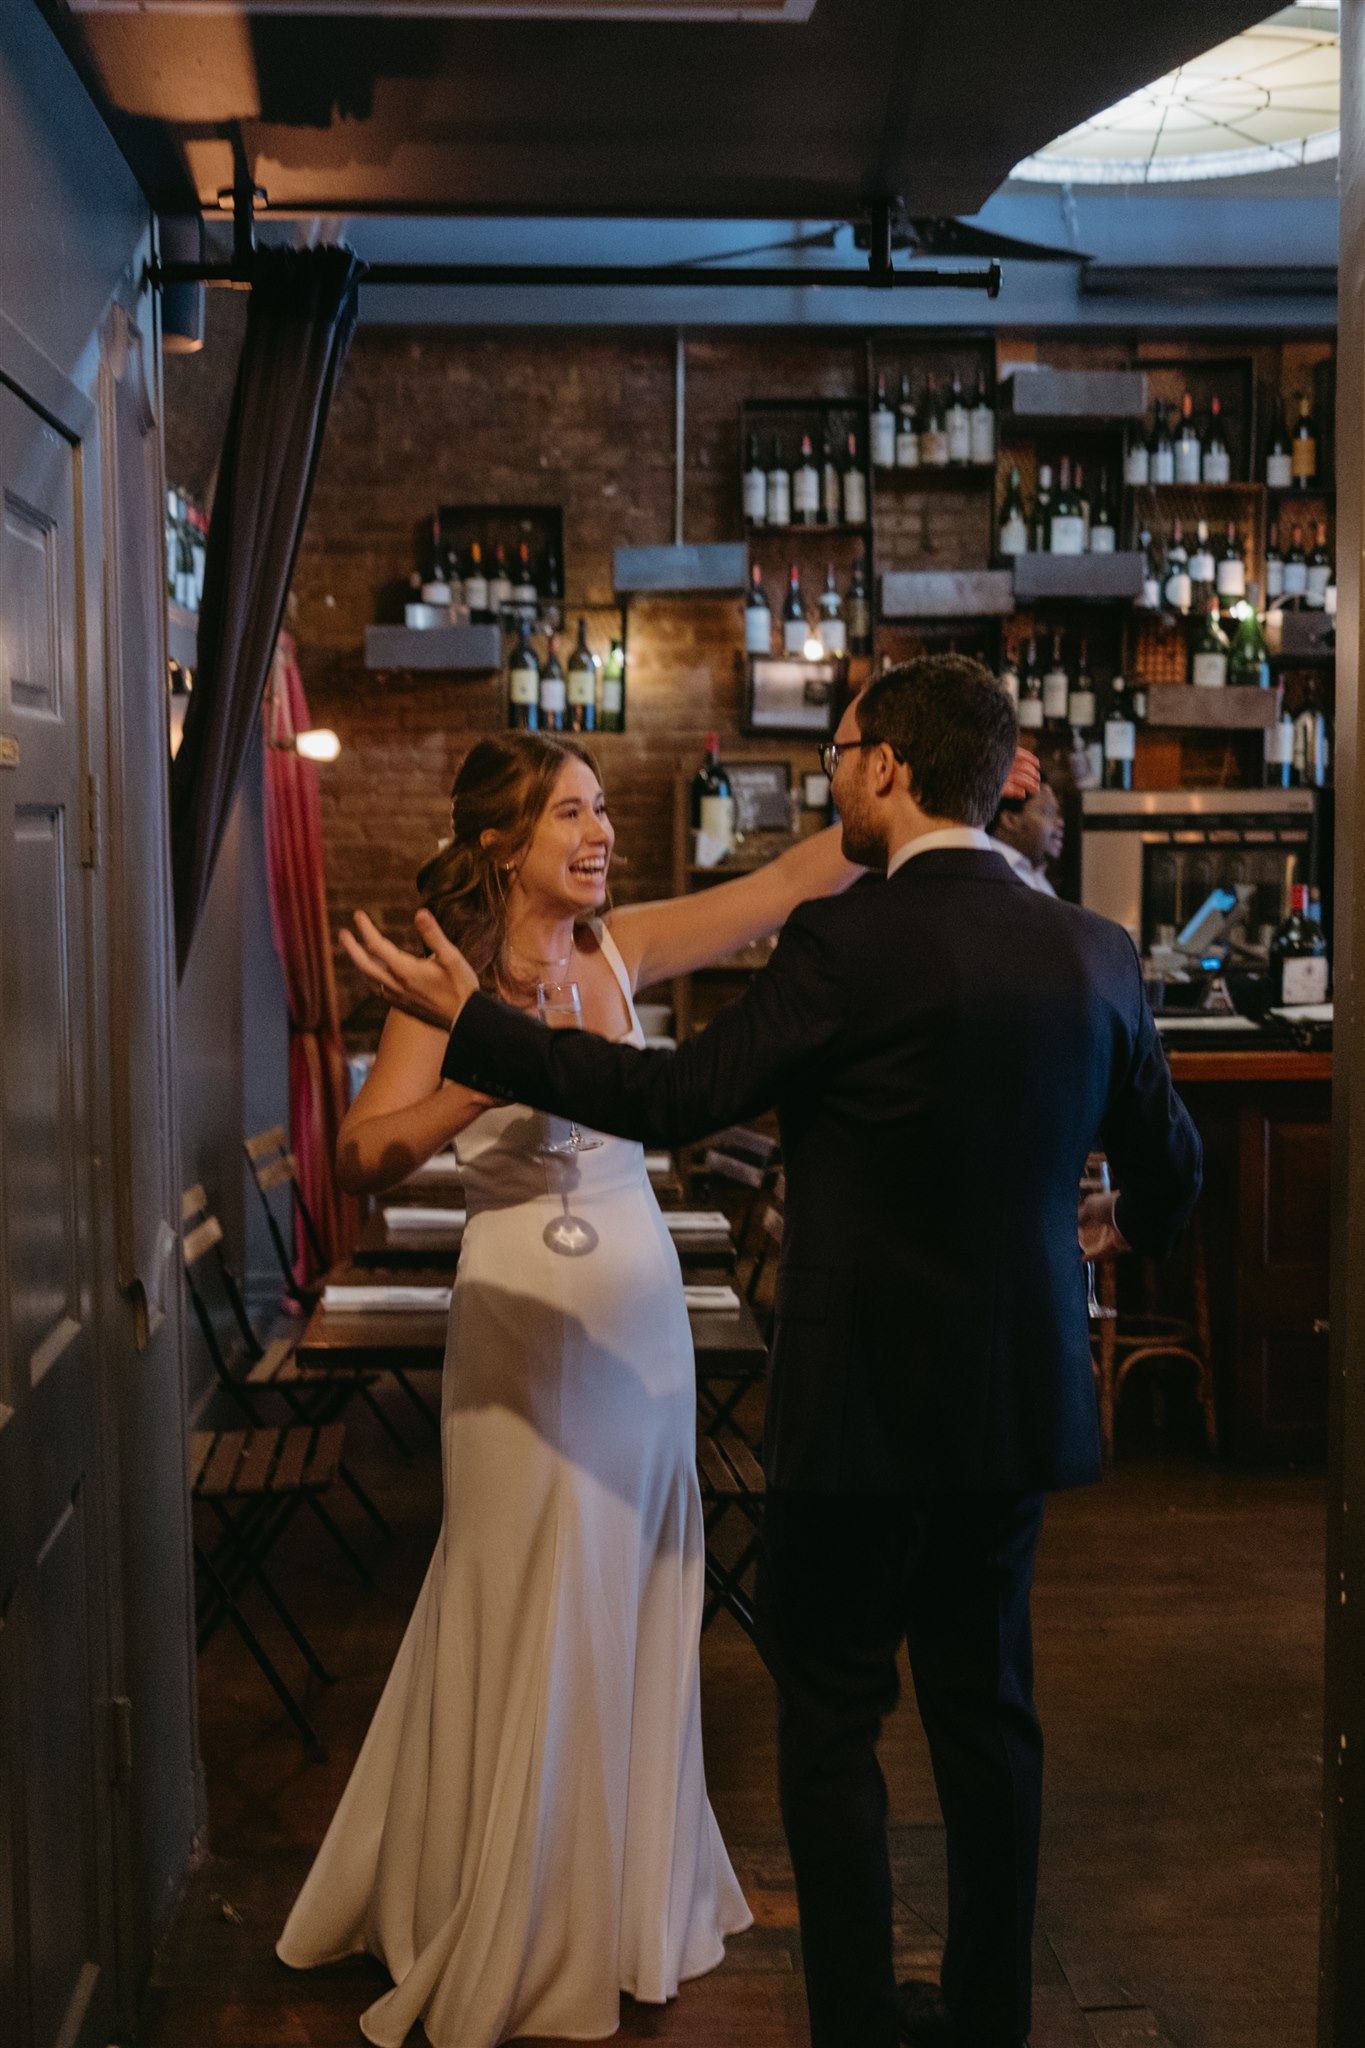 A couple happily dancing in a cozy bar with rows of bottles in the background. the woman is in a white dress, and the man is in a dark suit at their restaurant wedding